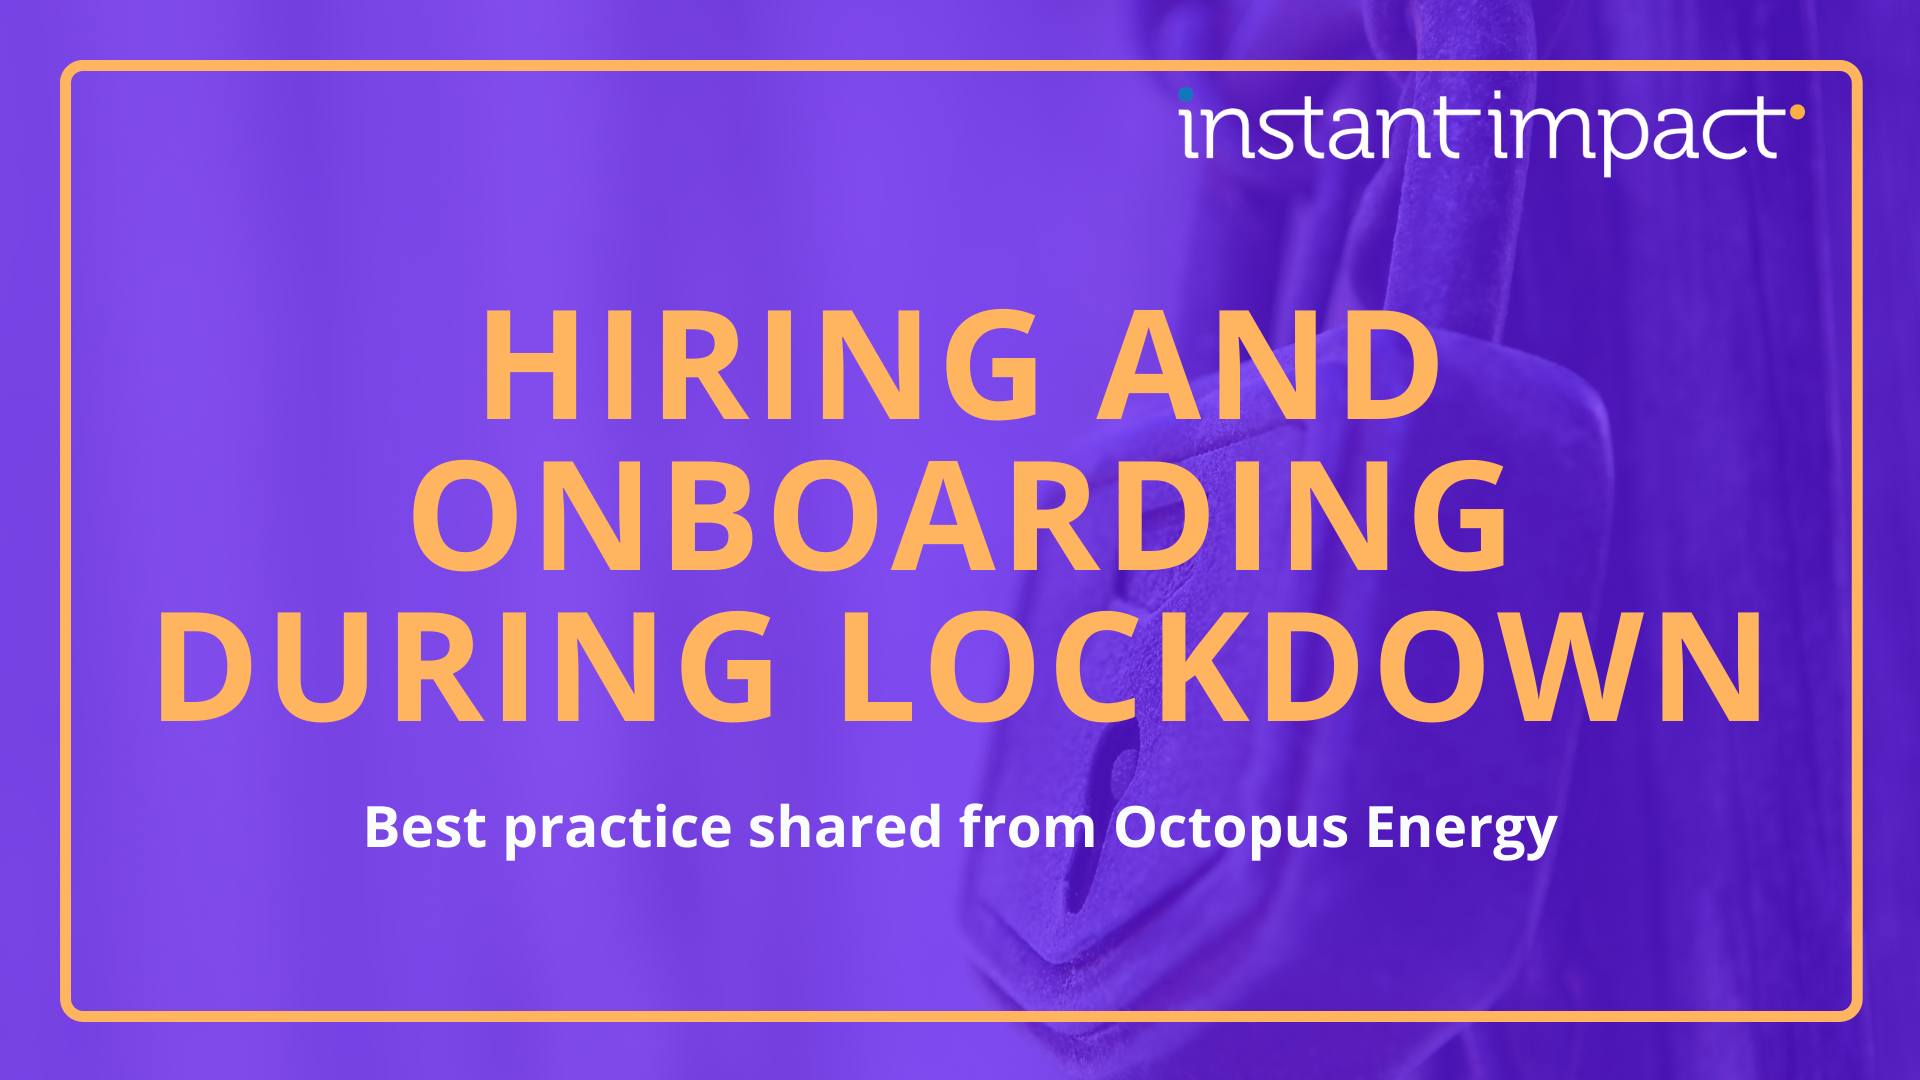 HIRING AND ON-BOARDING DURING LOCKDOWN